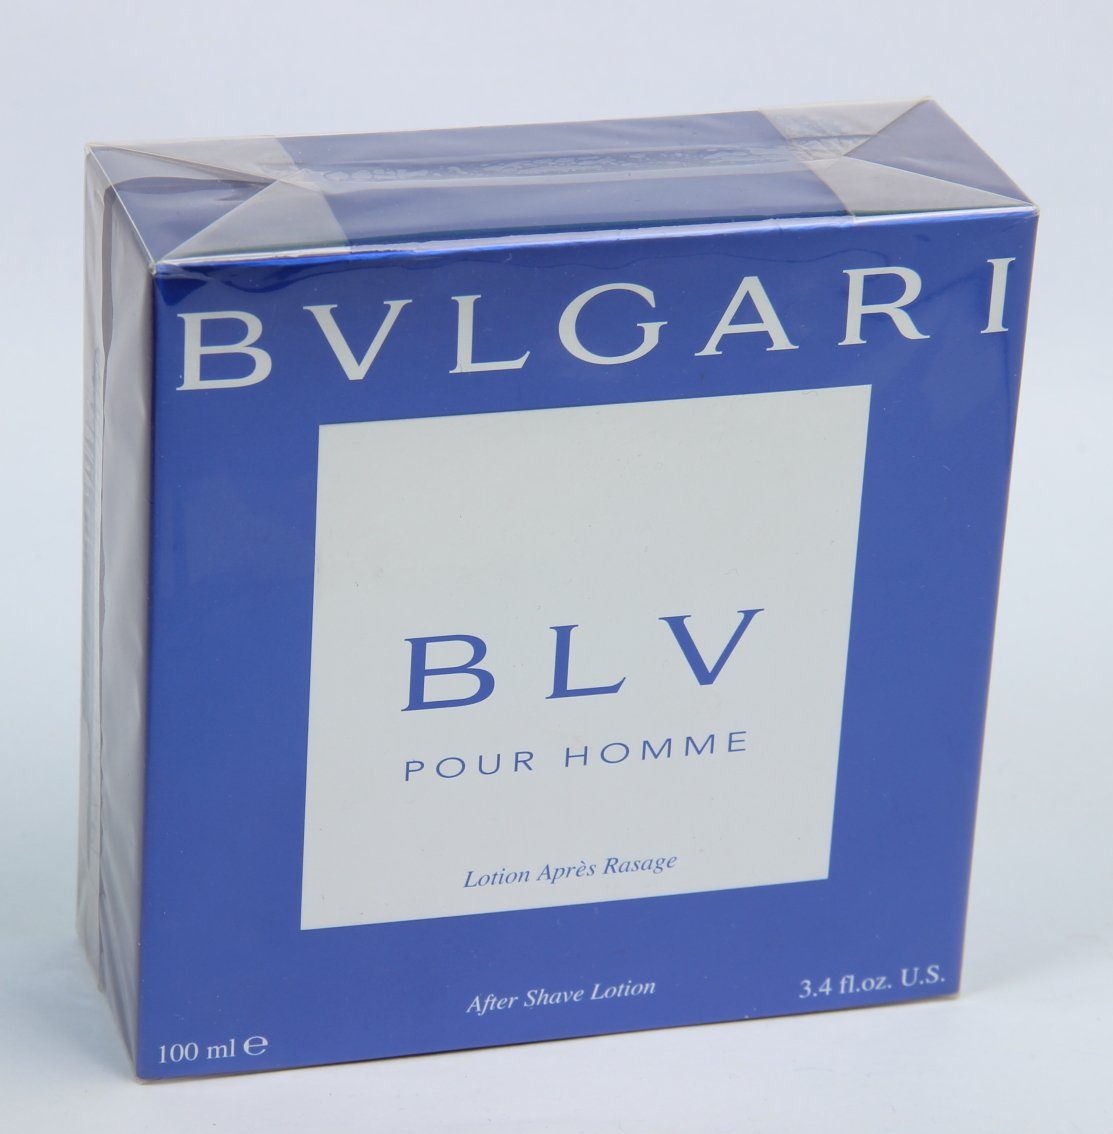 BVLGARI After Shave Lotion BVLGARI BLV Pour Homme After Shave Lotion 100ml